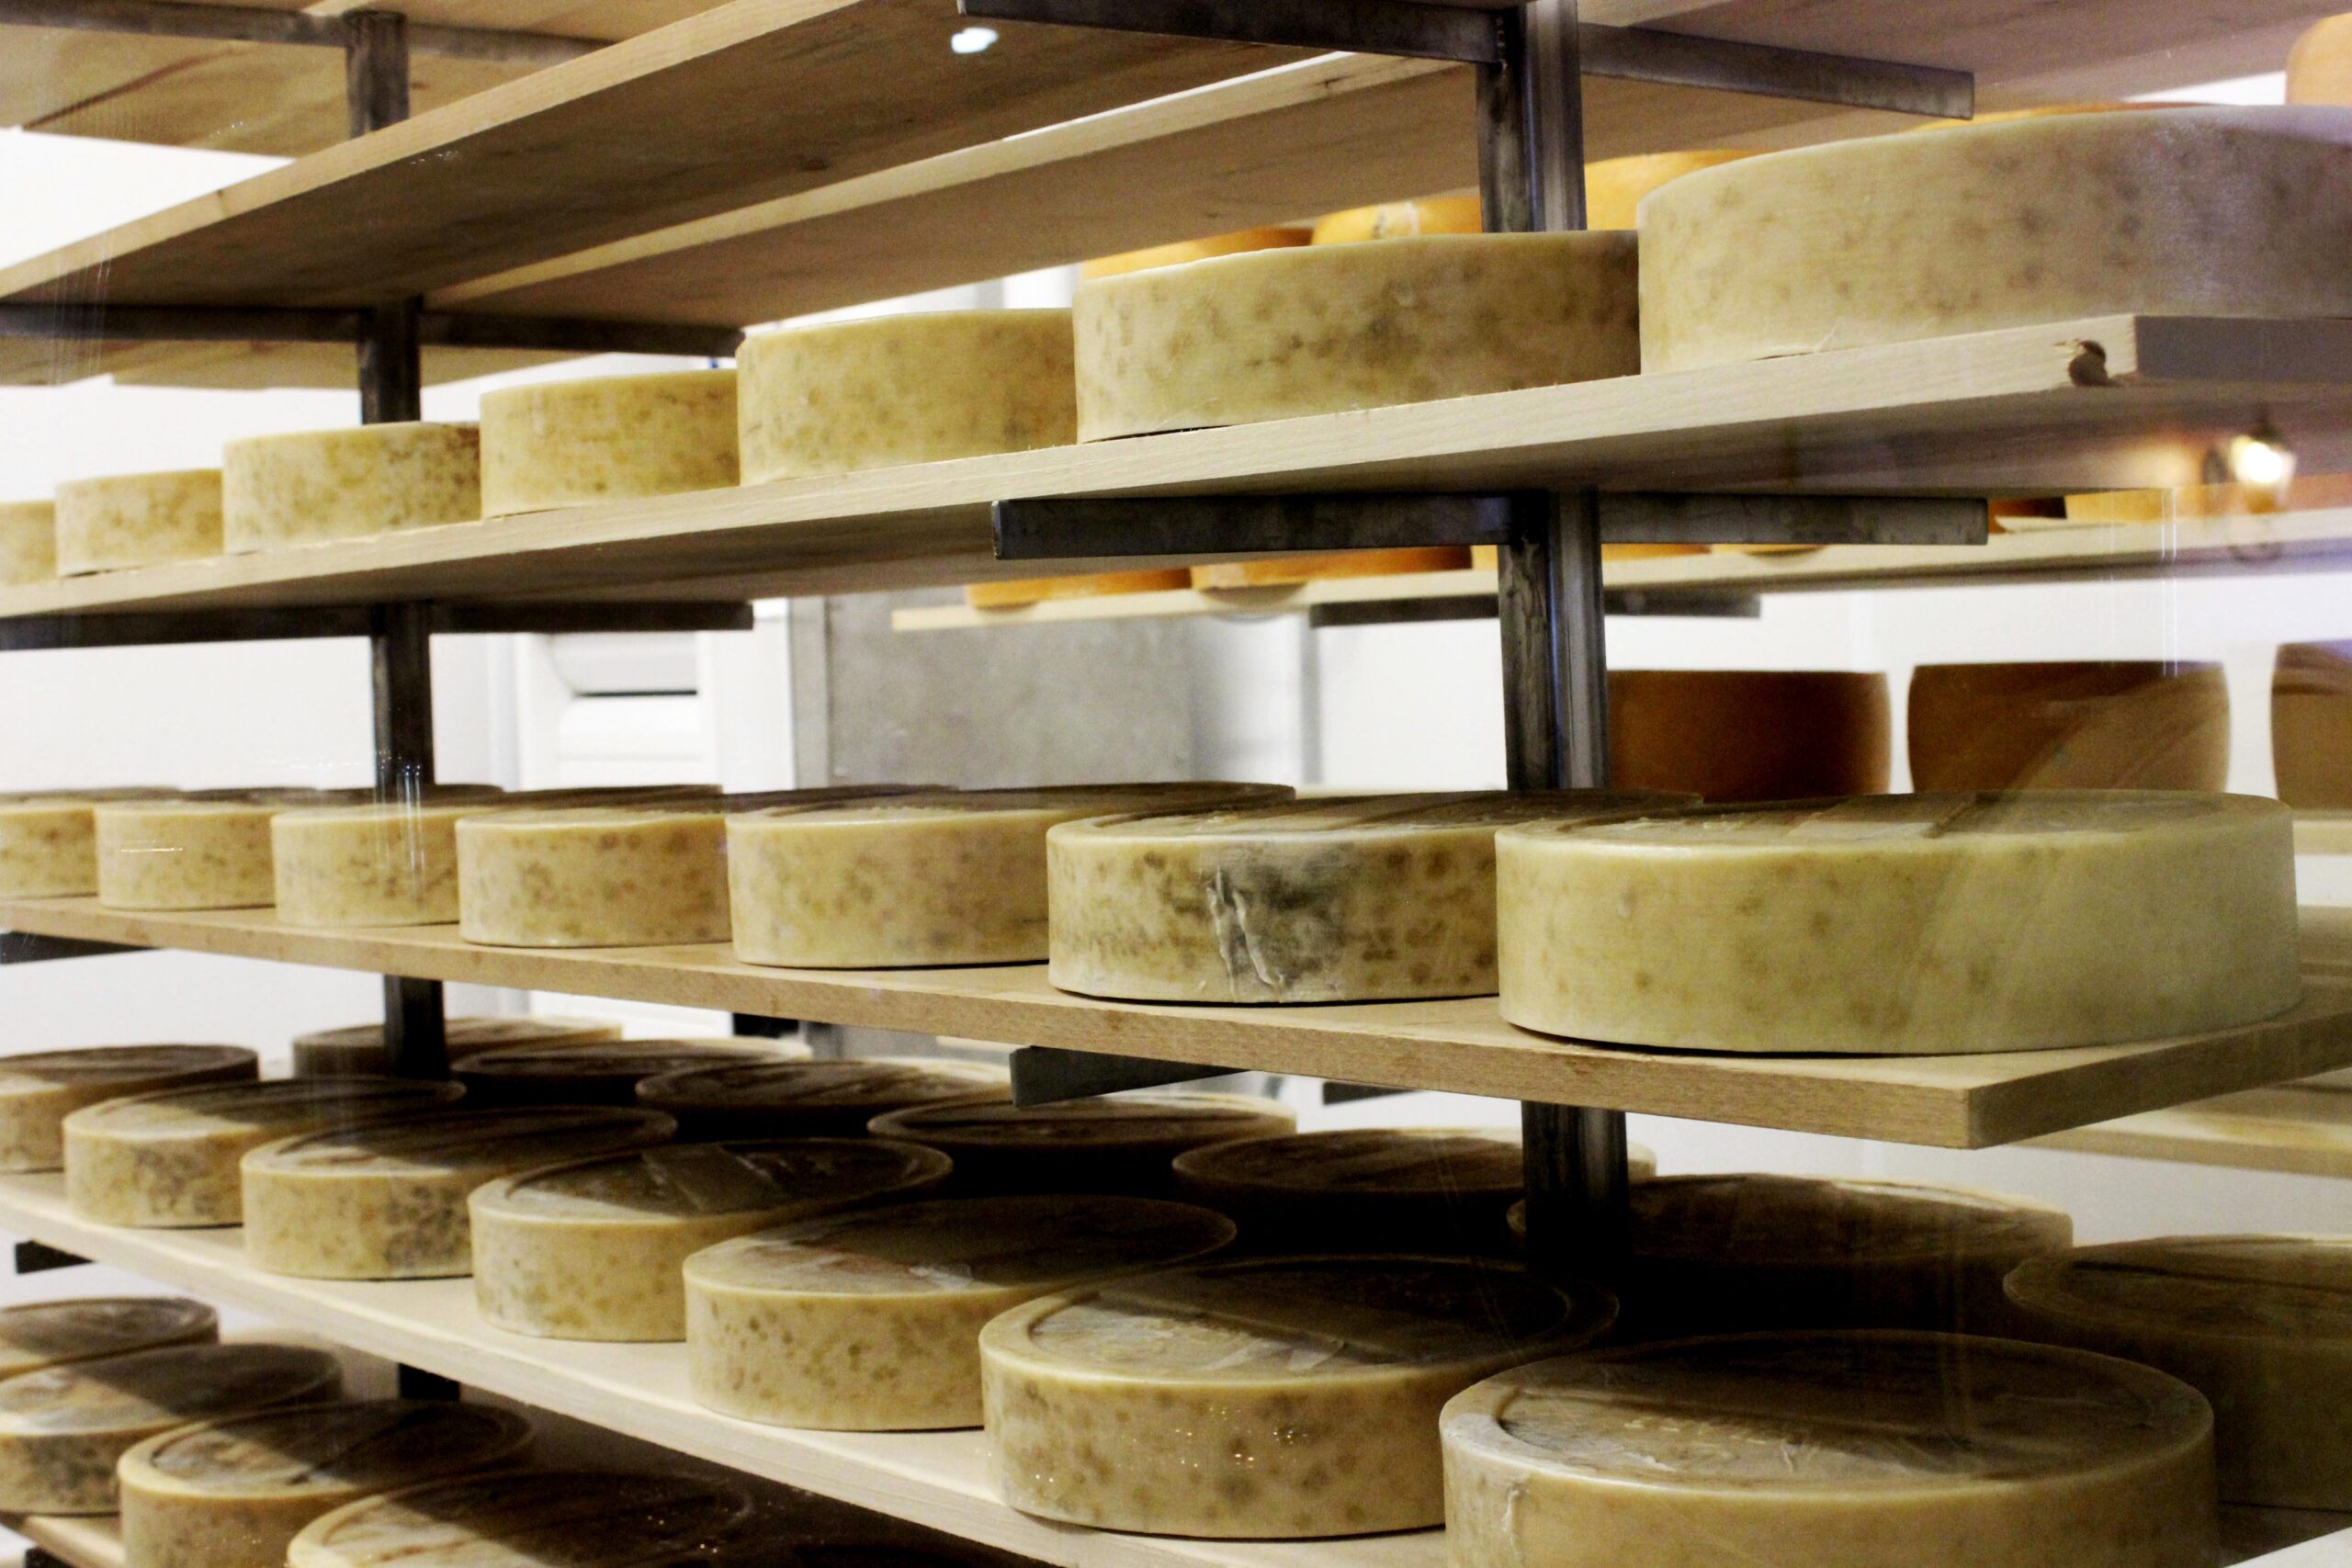 Cheese wheels displayed on shelves